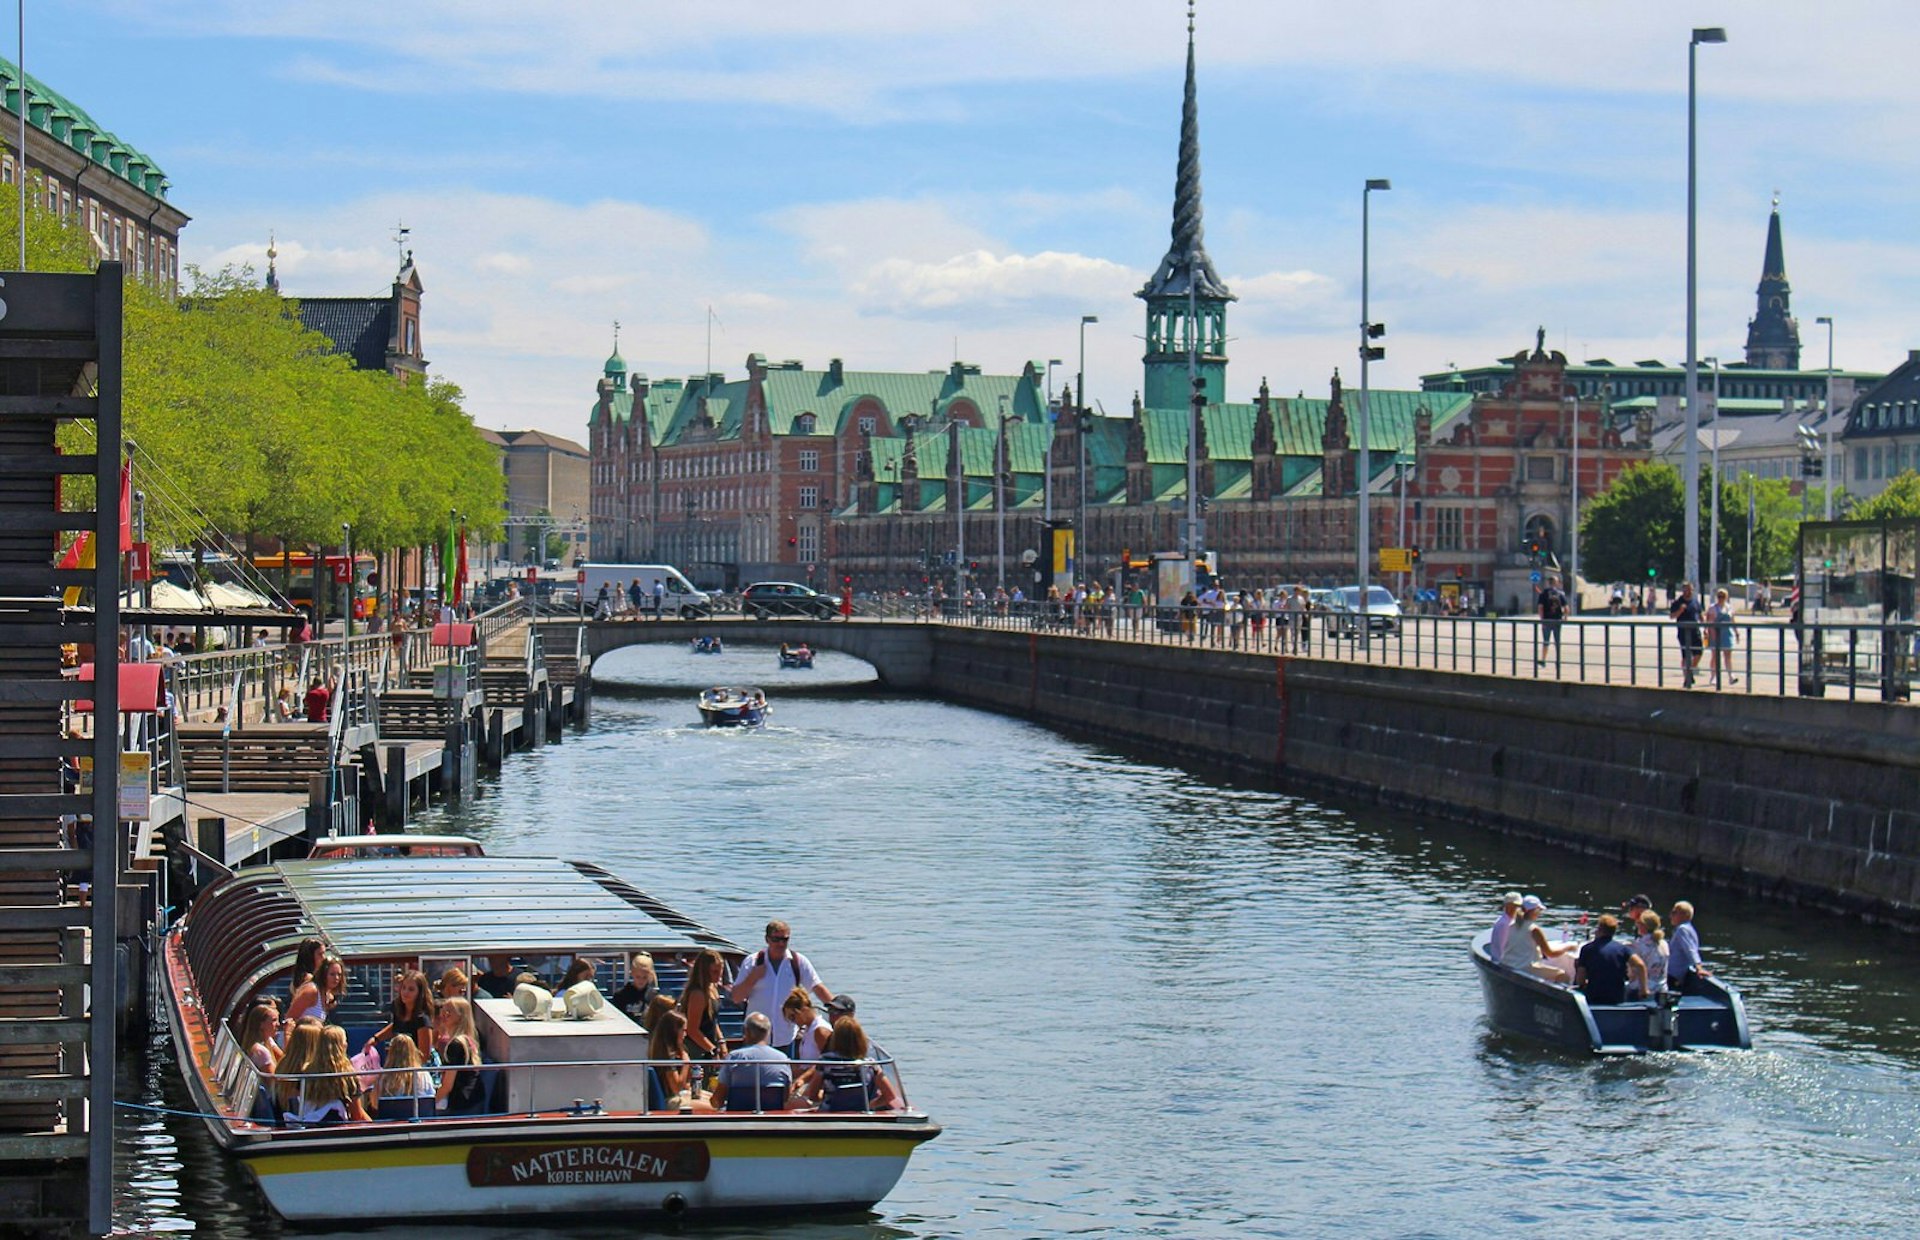 A view of a Copenhagen canals on a sunny day, with several pleasure boats filled with visitors © Caroline Hadamitzky / Lonely Planet